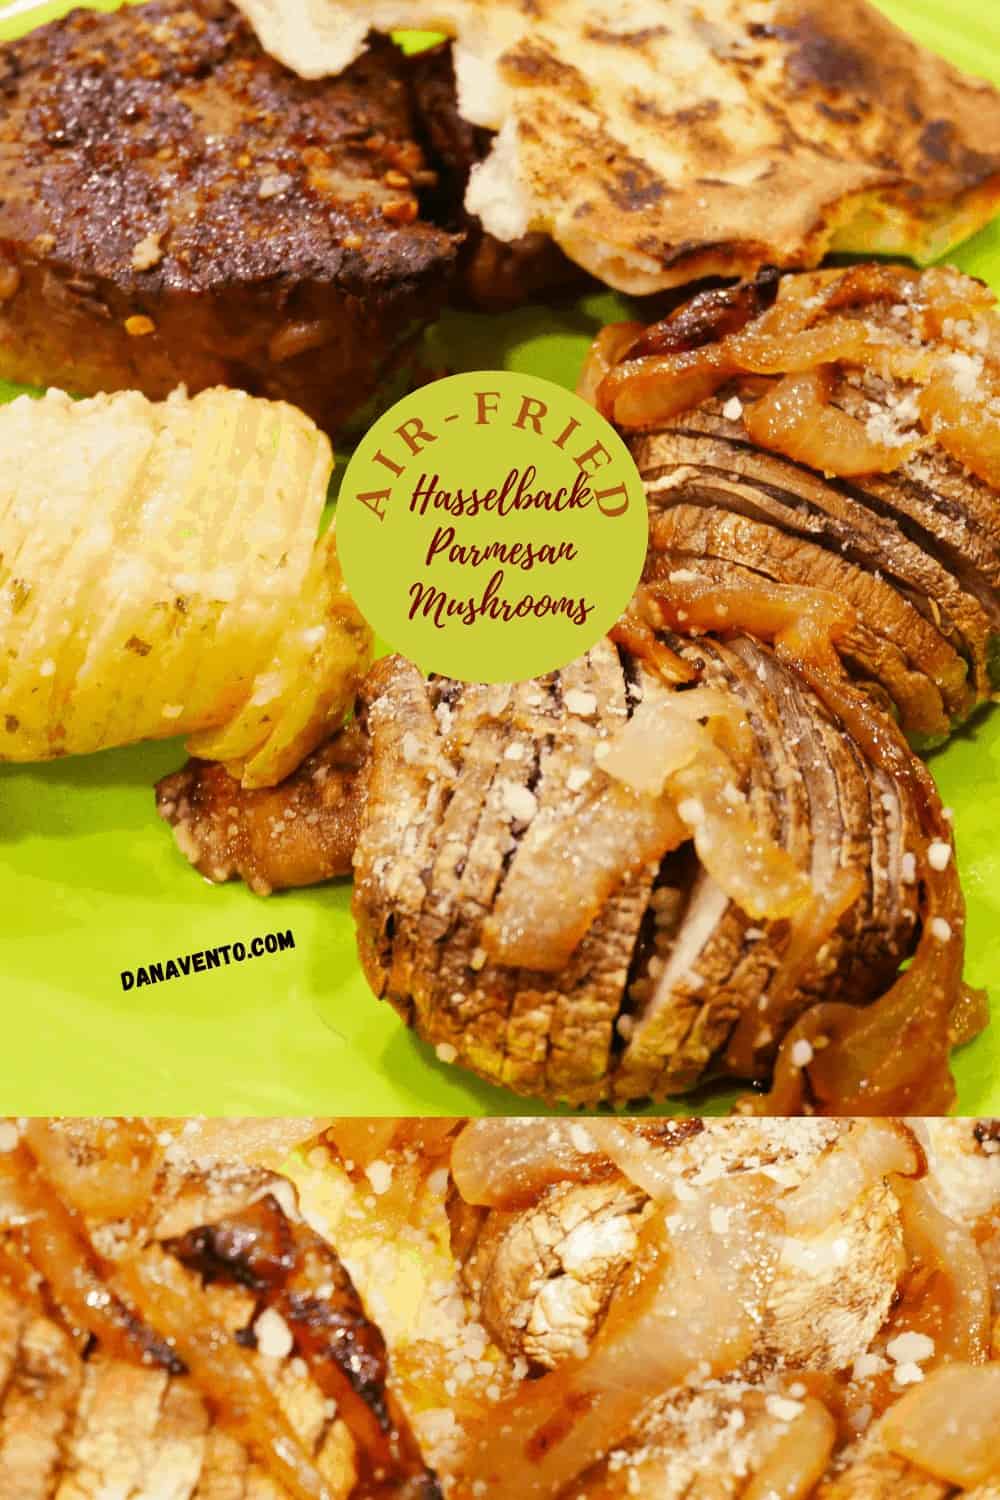 Hasselback parmesan mushrroms with beef on plate